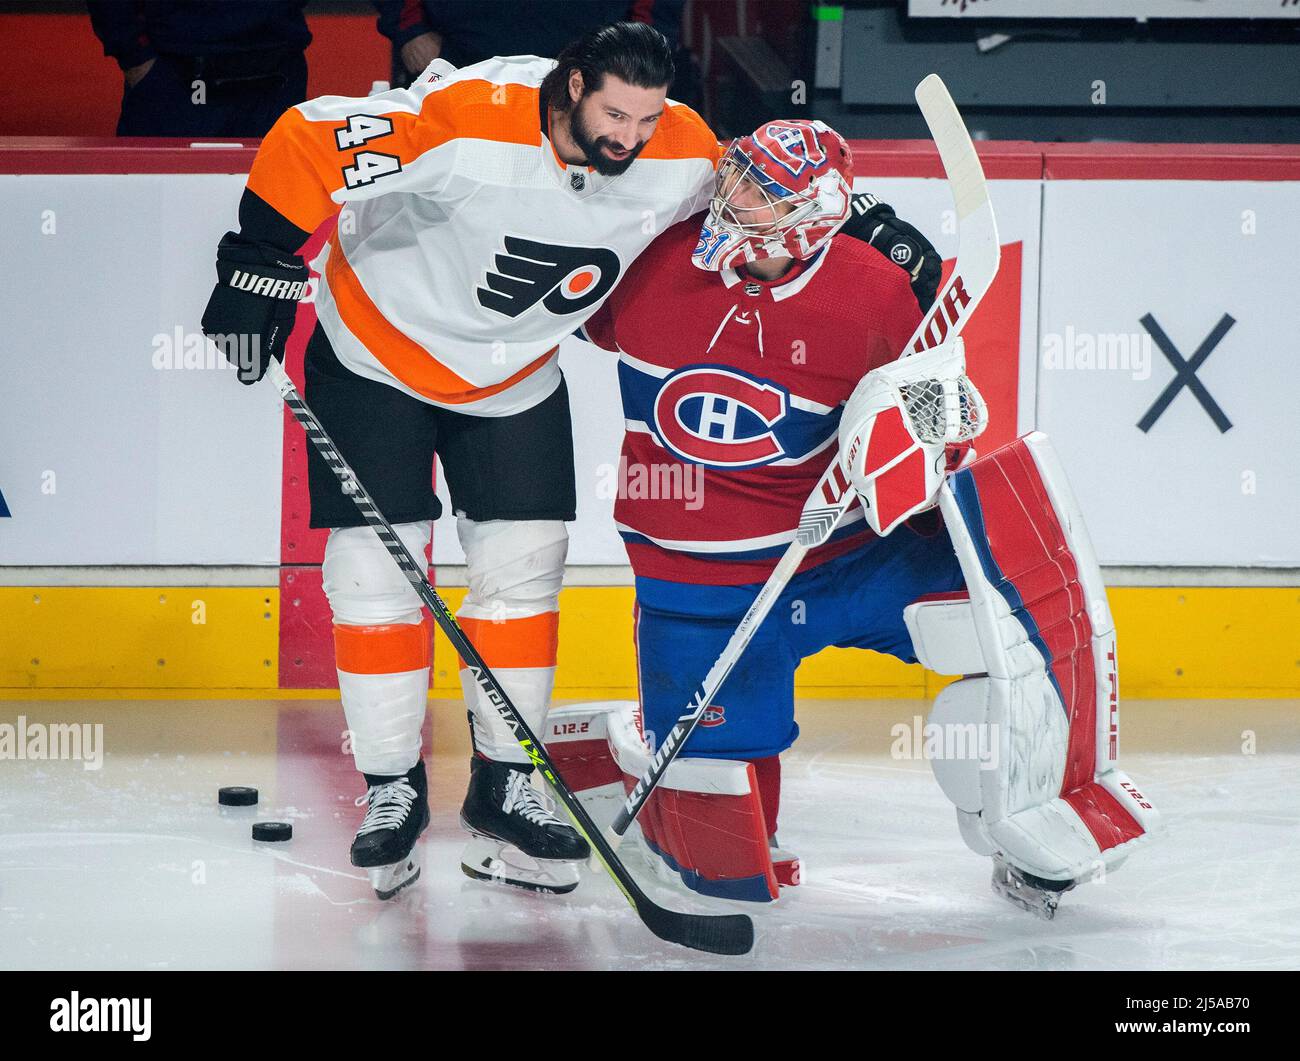 Montreal Canadiens goaltender Carey Price, right, is hugged by former teammate and Philadelphia Flyers player Nate Thompson prior to NHL hockey action in Montreal, Thursday, April 21, 2022